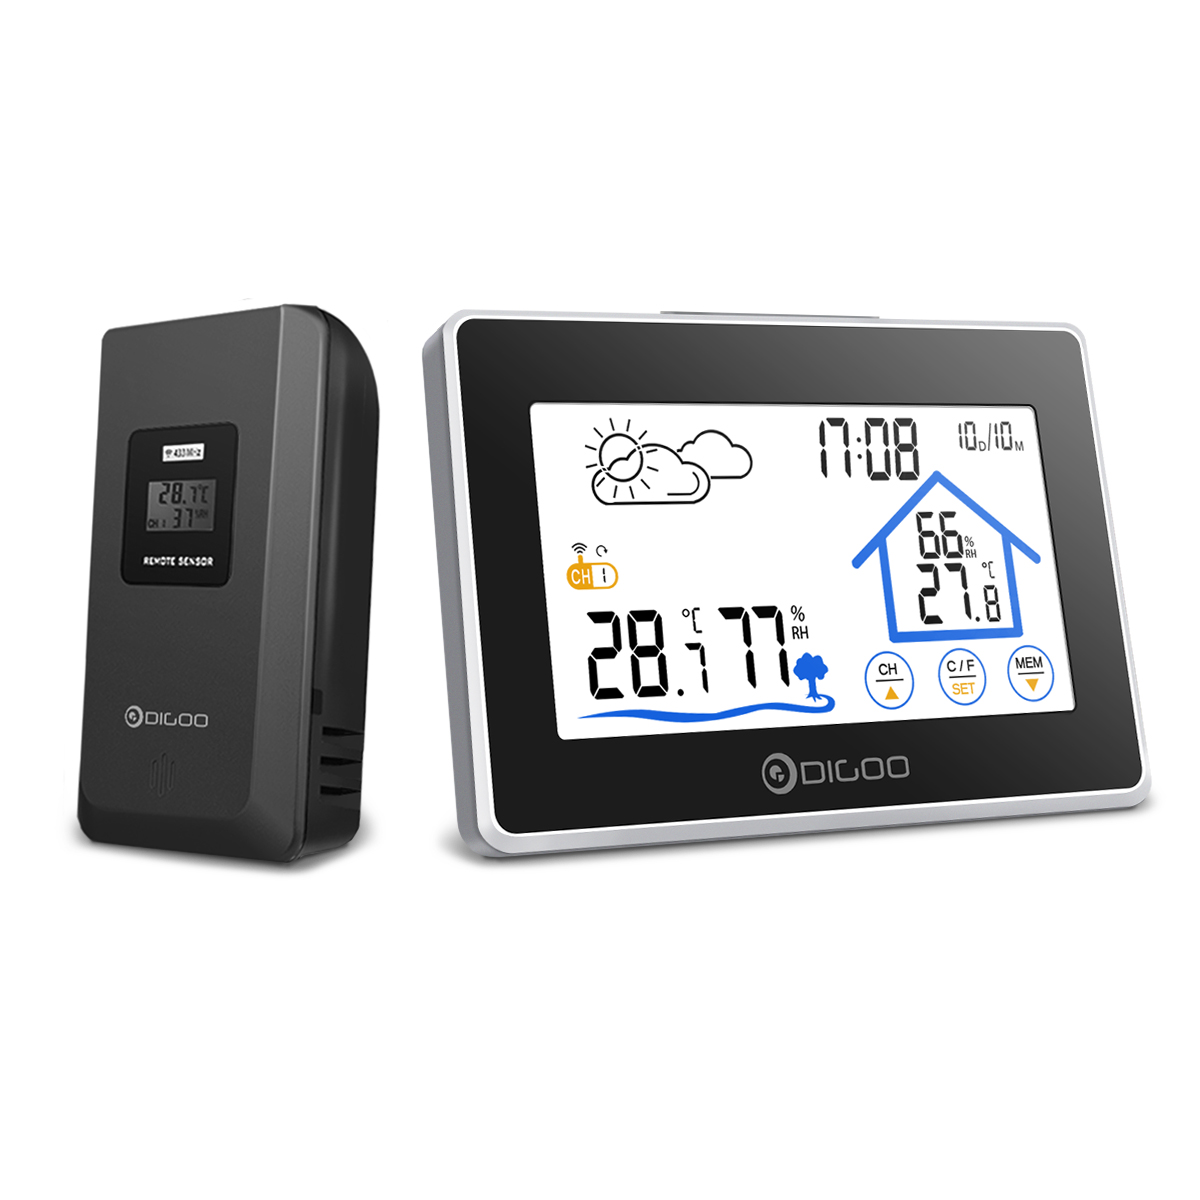 Digoo DG-TH8380 Wireless Thermometer Hygrometer Touch Screen Weather Station With Thermometer Outdoor Forecast Sensor Clock